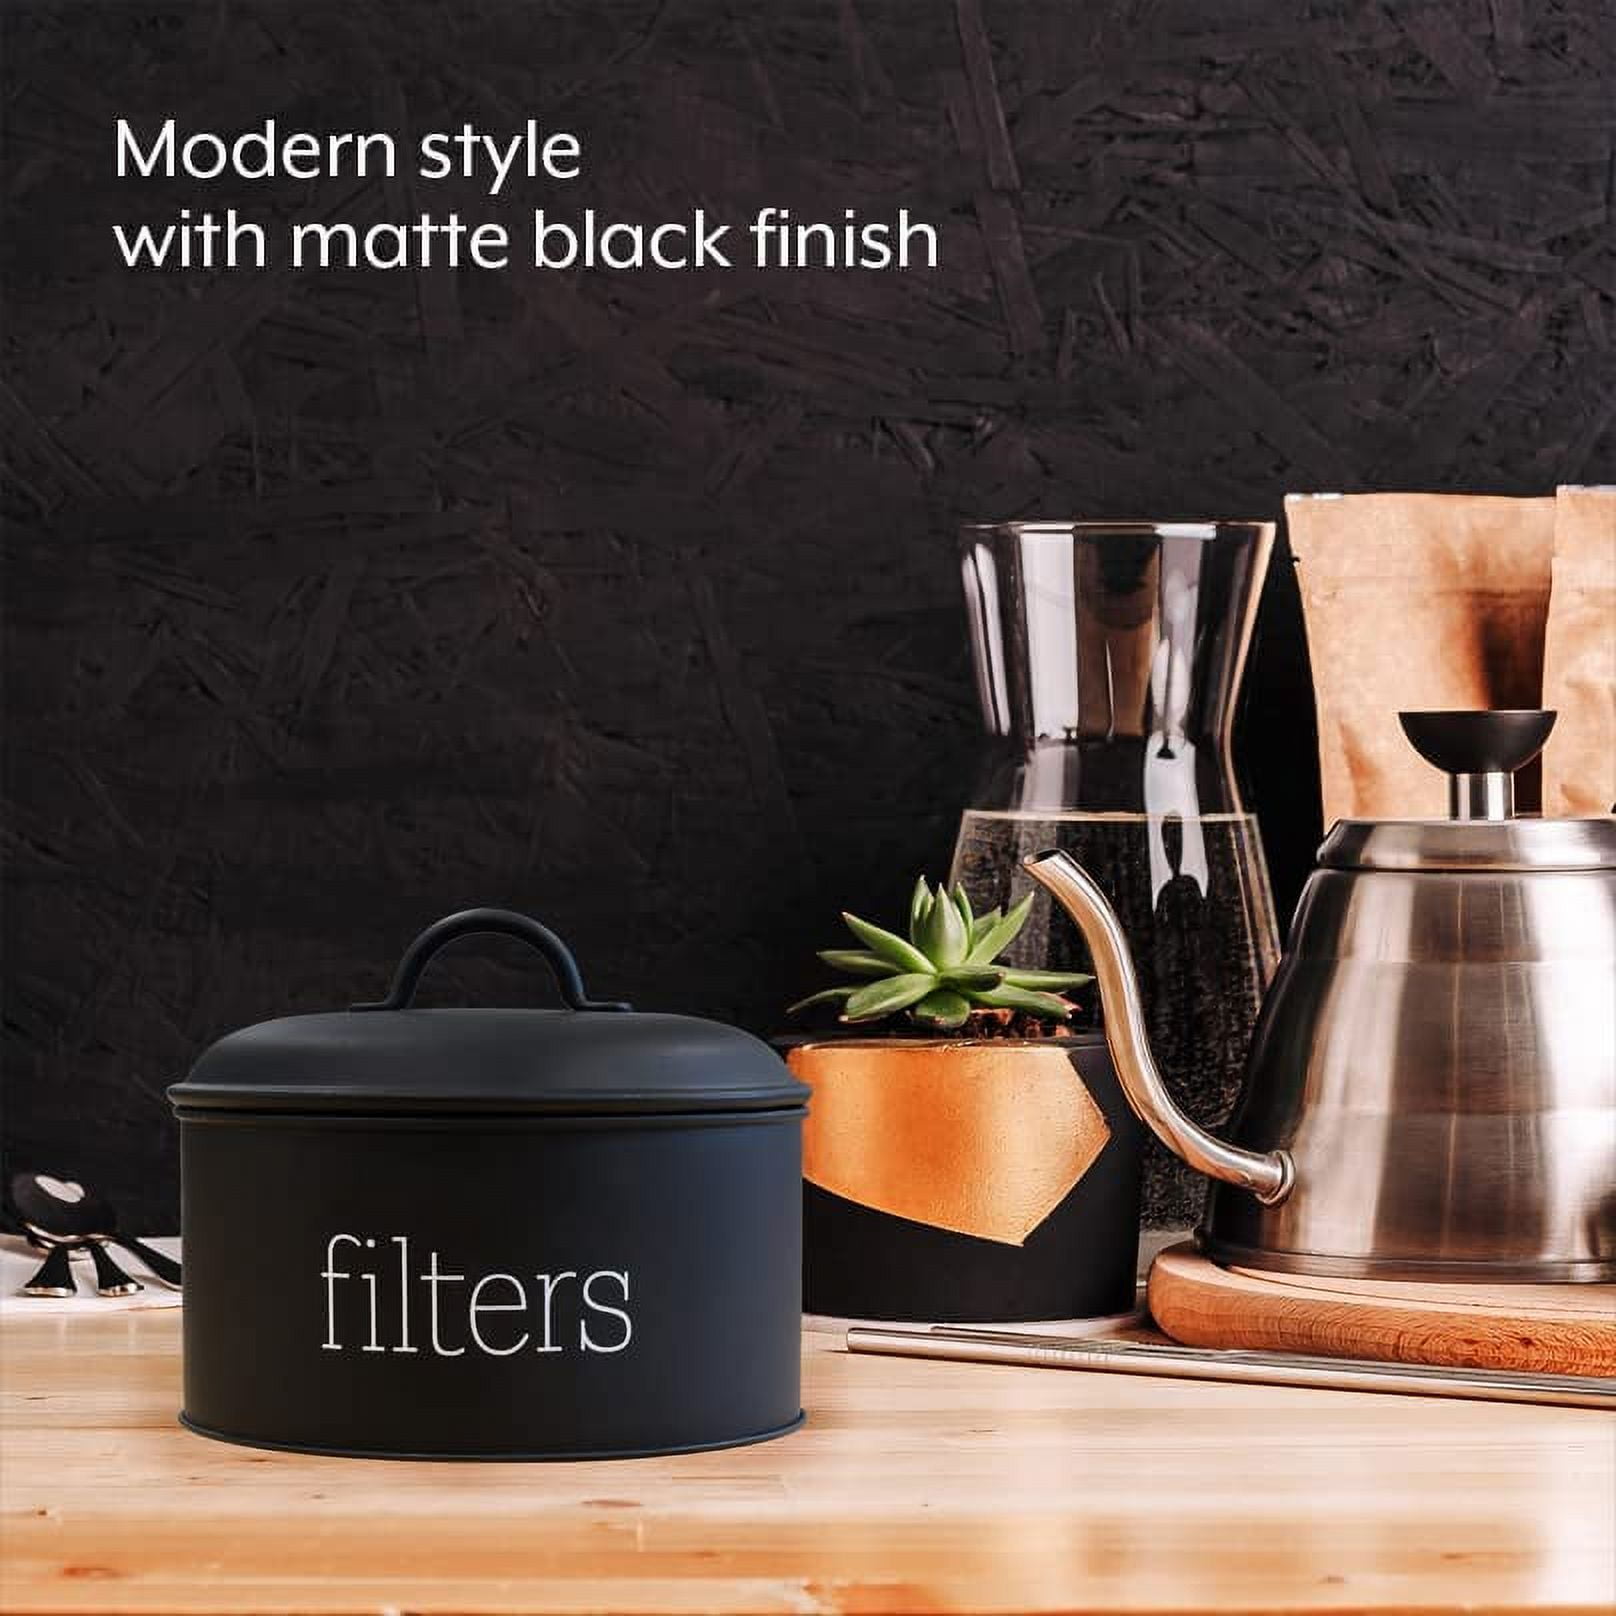 AuldHome Enamelware Grease Container with Strainer (Black), Farmhouse Style  Kitchen StorageTin, Labeled “Grease” 